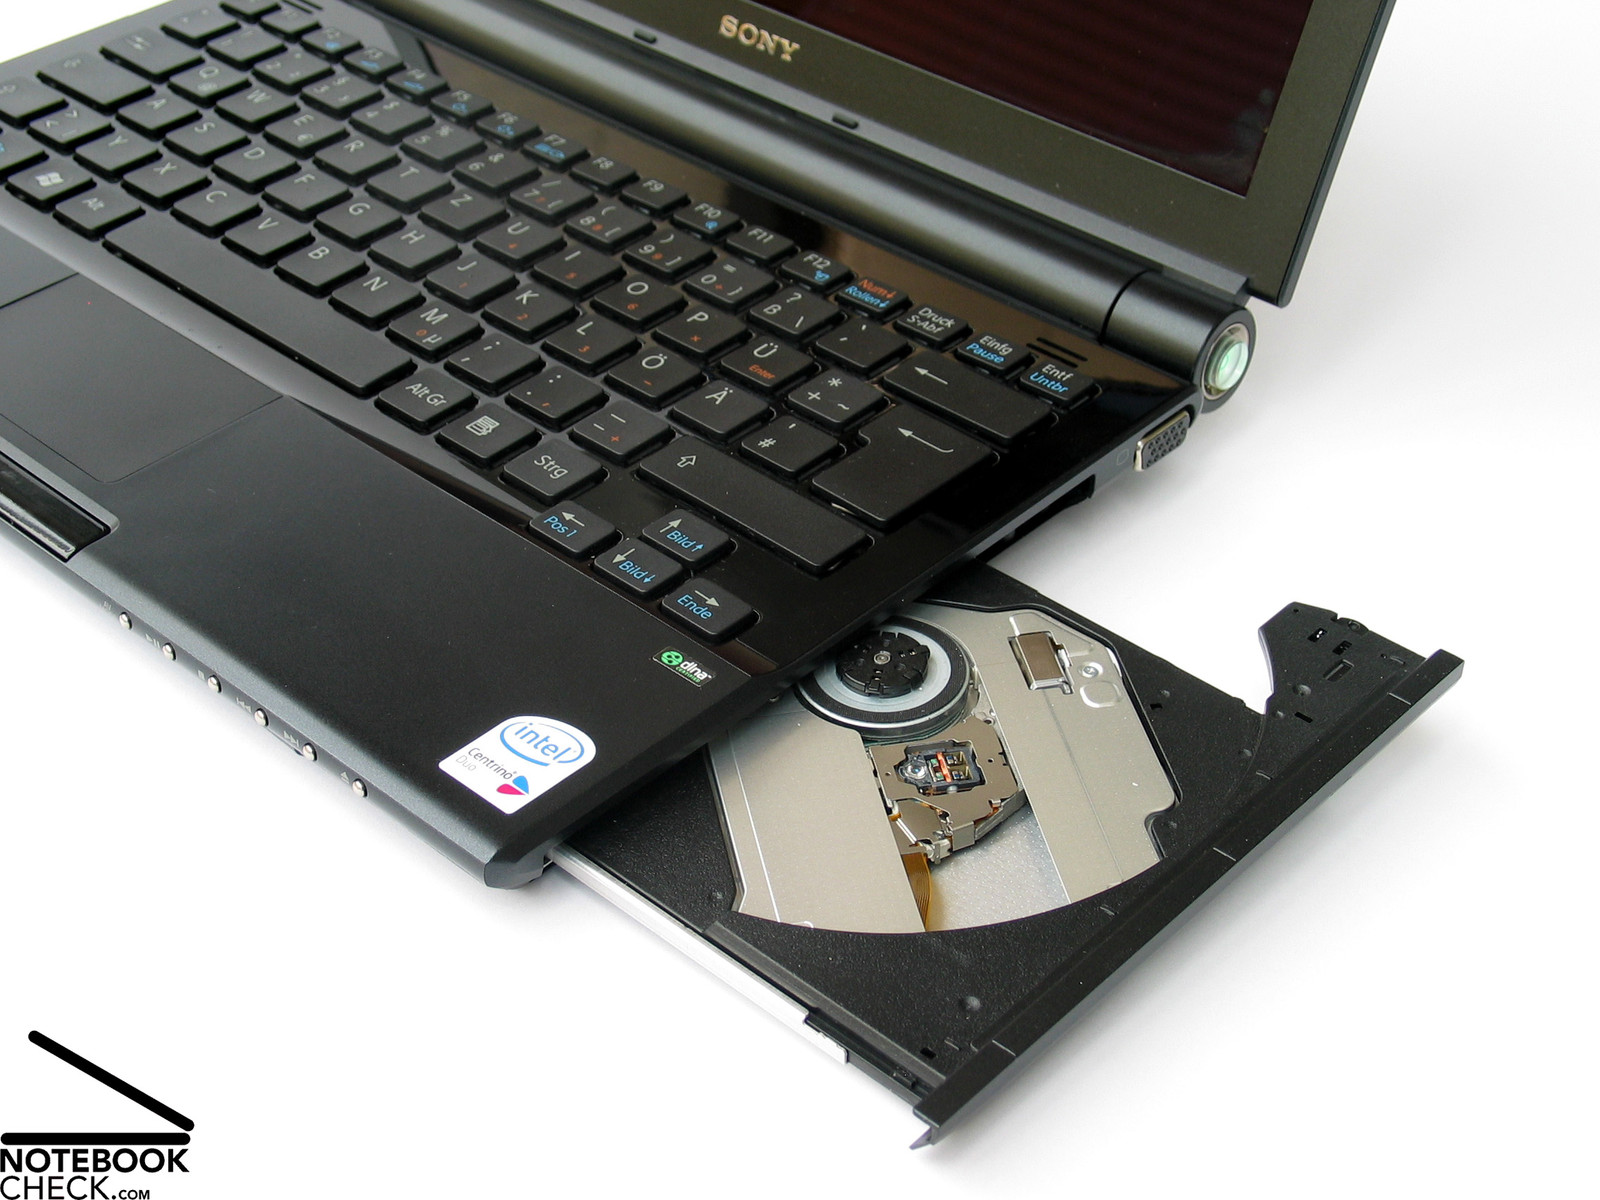 Free download sony vaio recovery disc